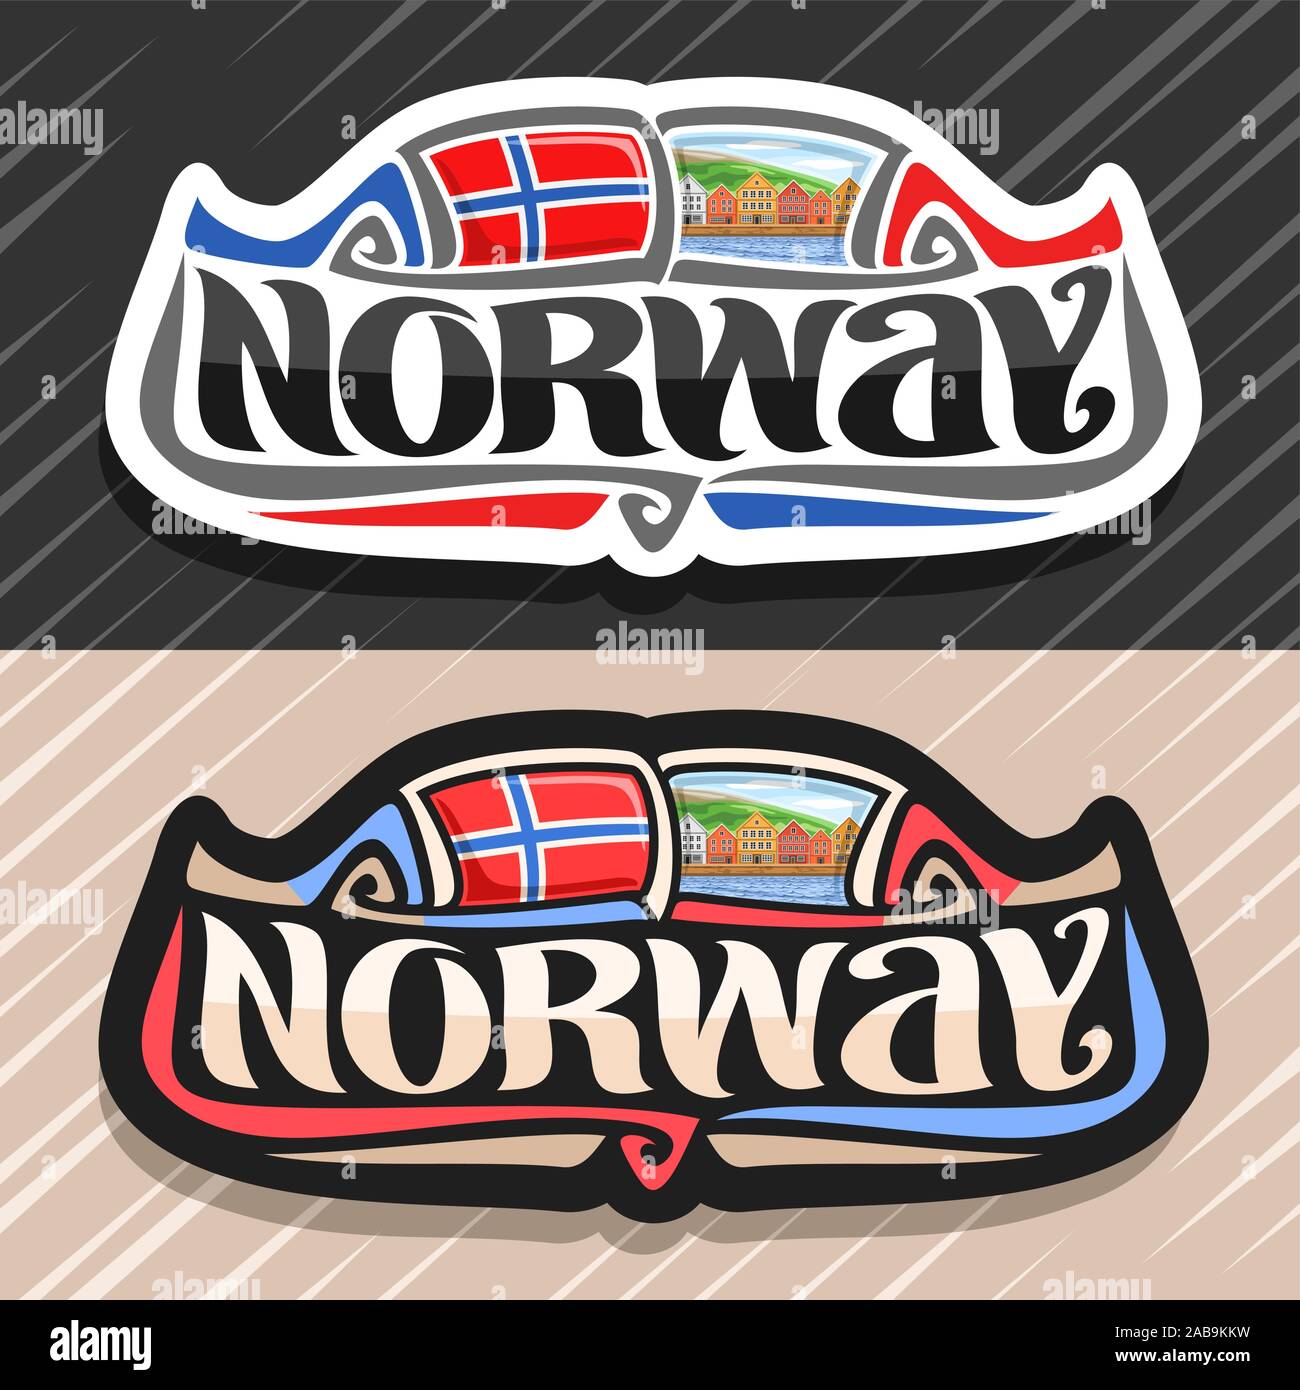 Vector logo for Norway country, fridge magnet with norwegian flag, original brush typeface for word norway and norwegian national symbol - old houses Stock Vector